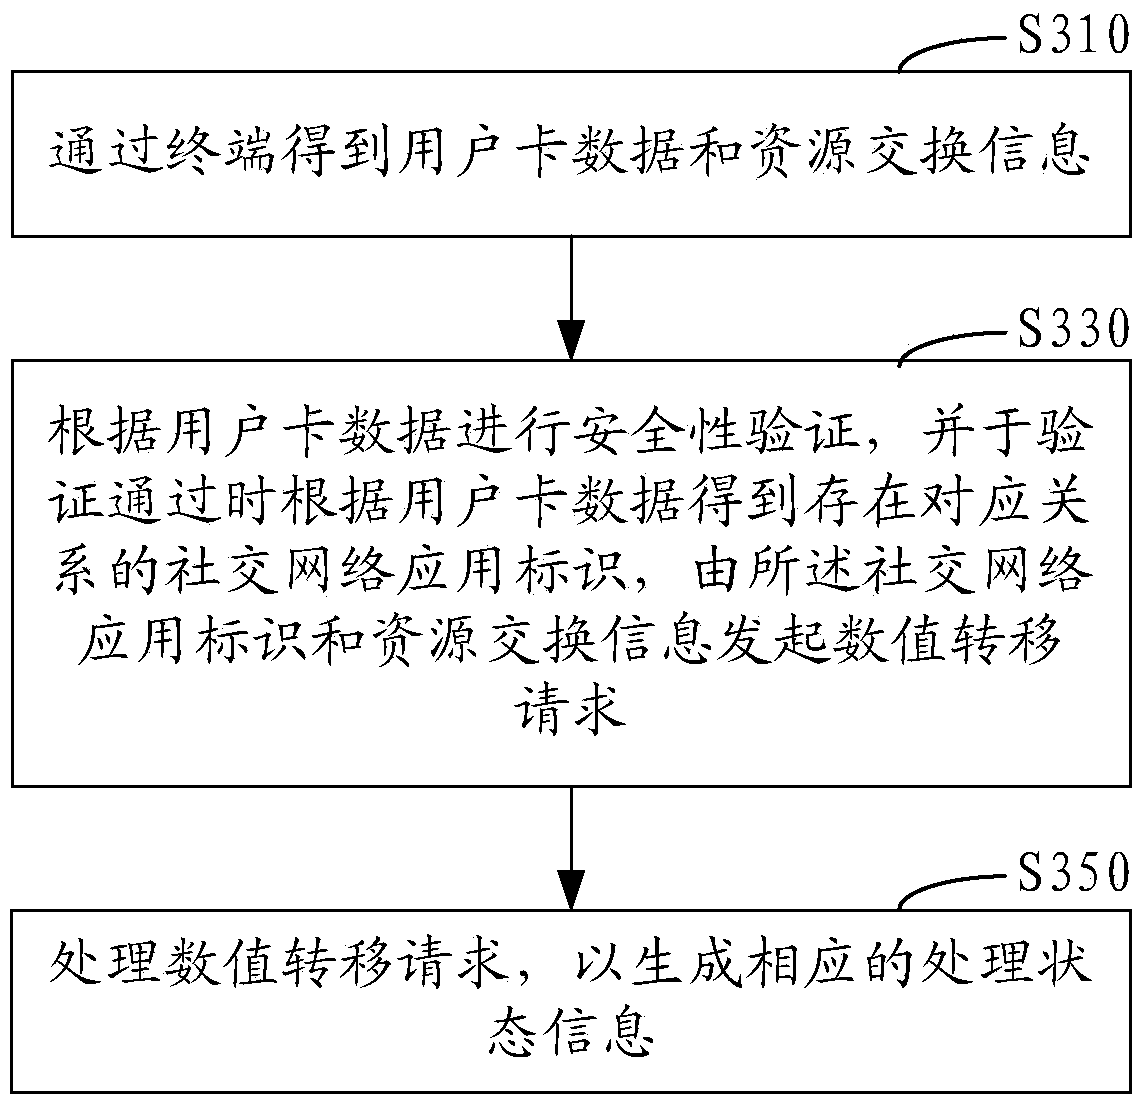 Method and system for achieving resource exchange information processing